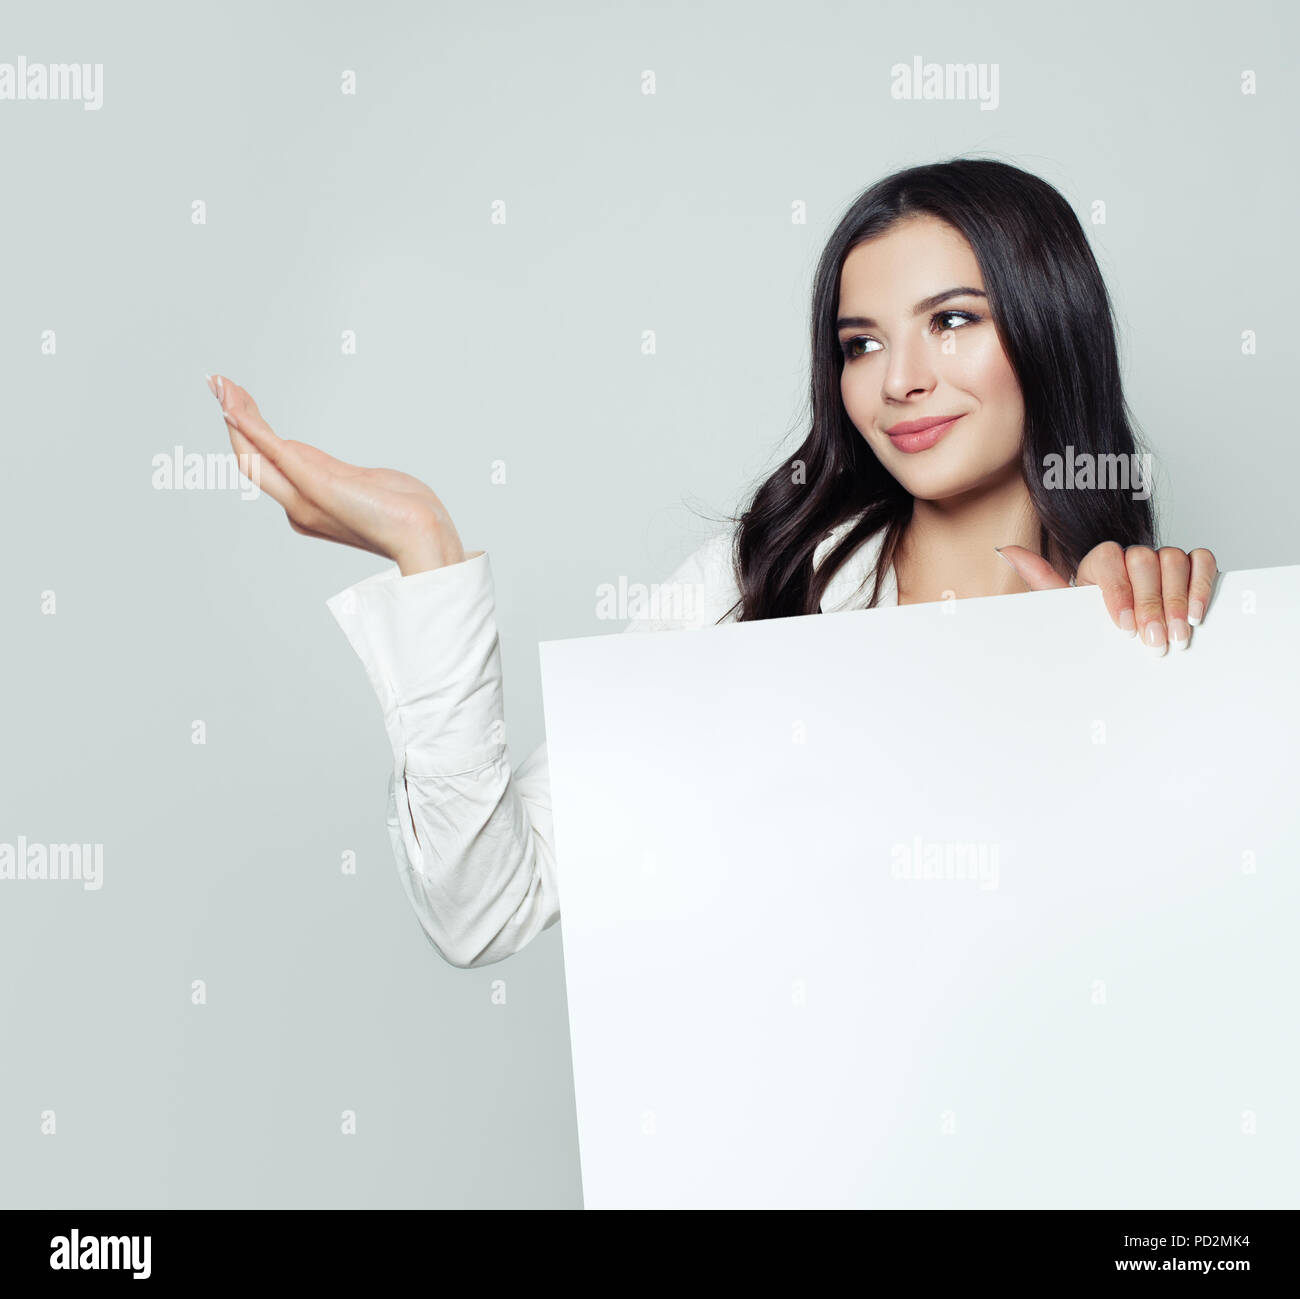 Young woman student with empty open hand and white blank paper banner background with copy space. Business woman smiling, business and education conce Stock Photo